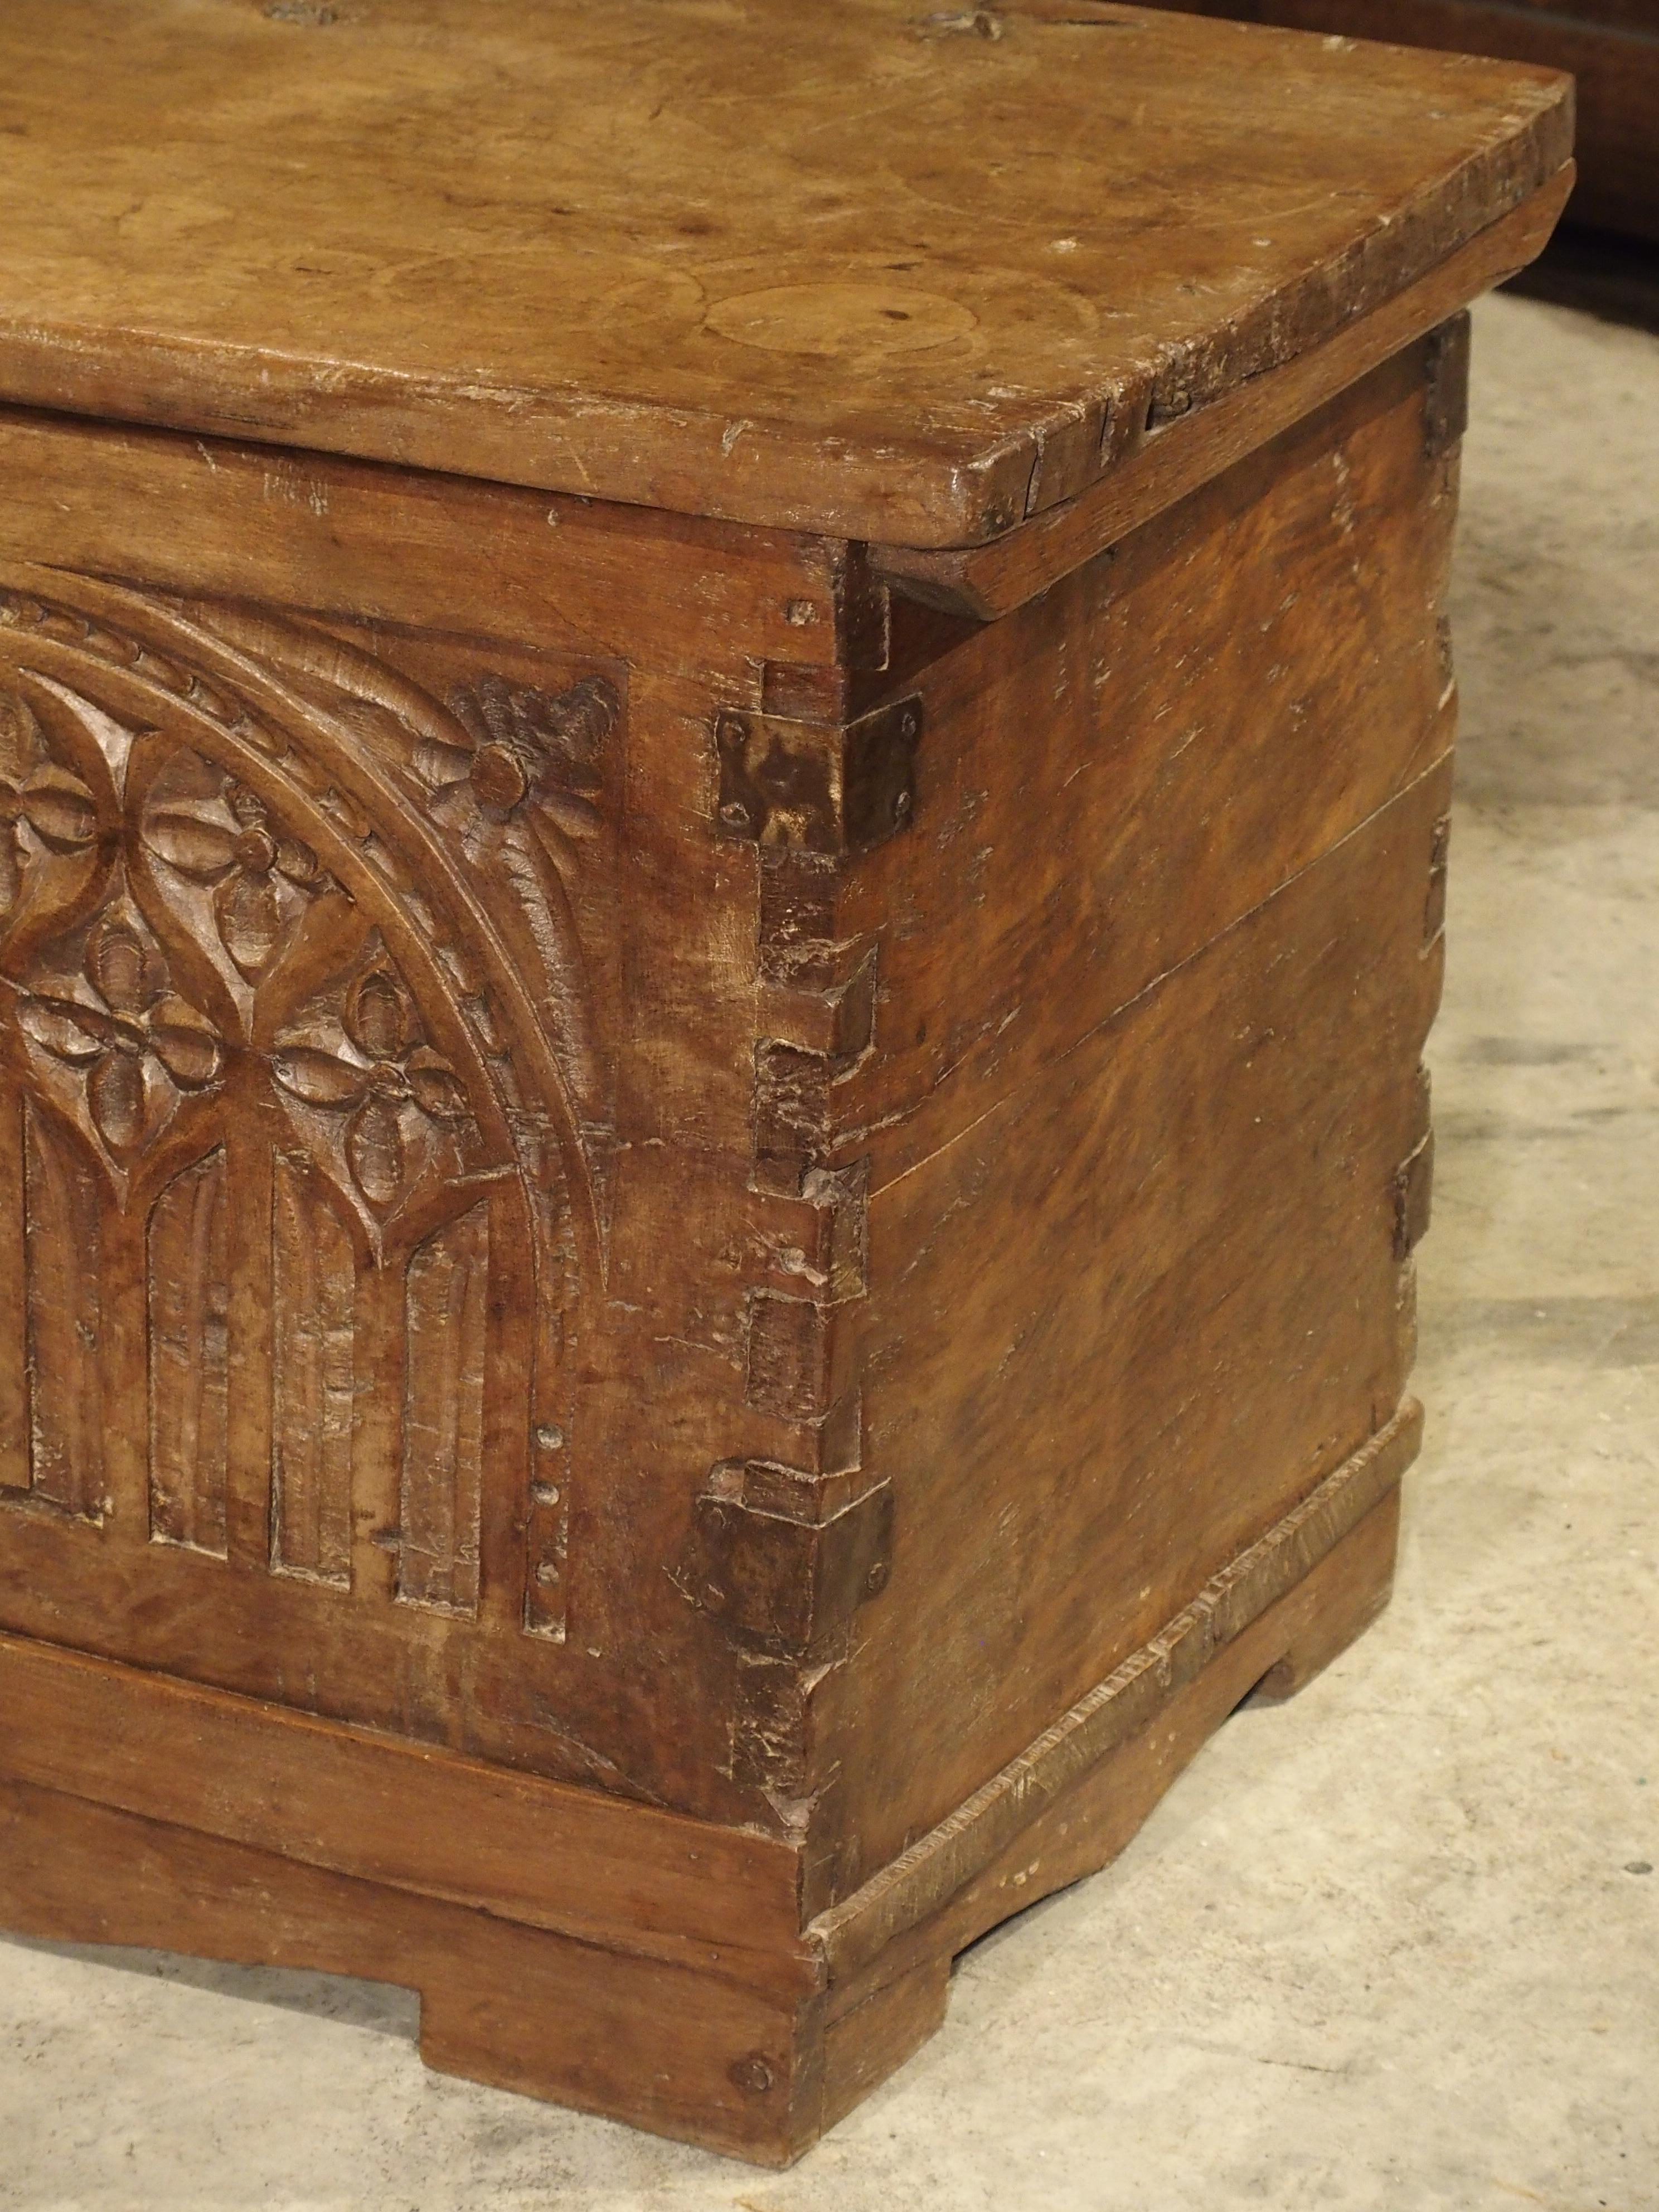 Hand-Carved Early 18th Century Walnut Wood Trunk from France